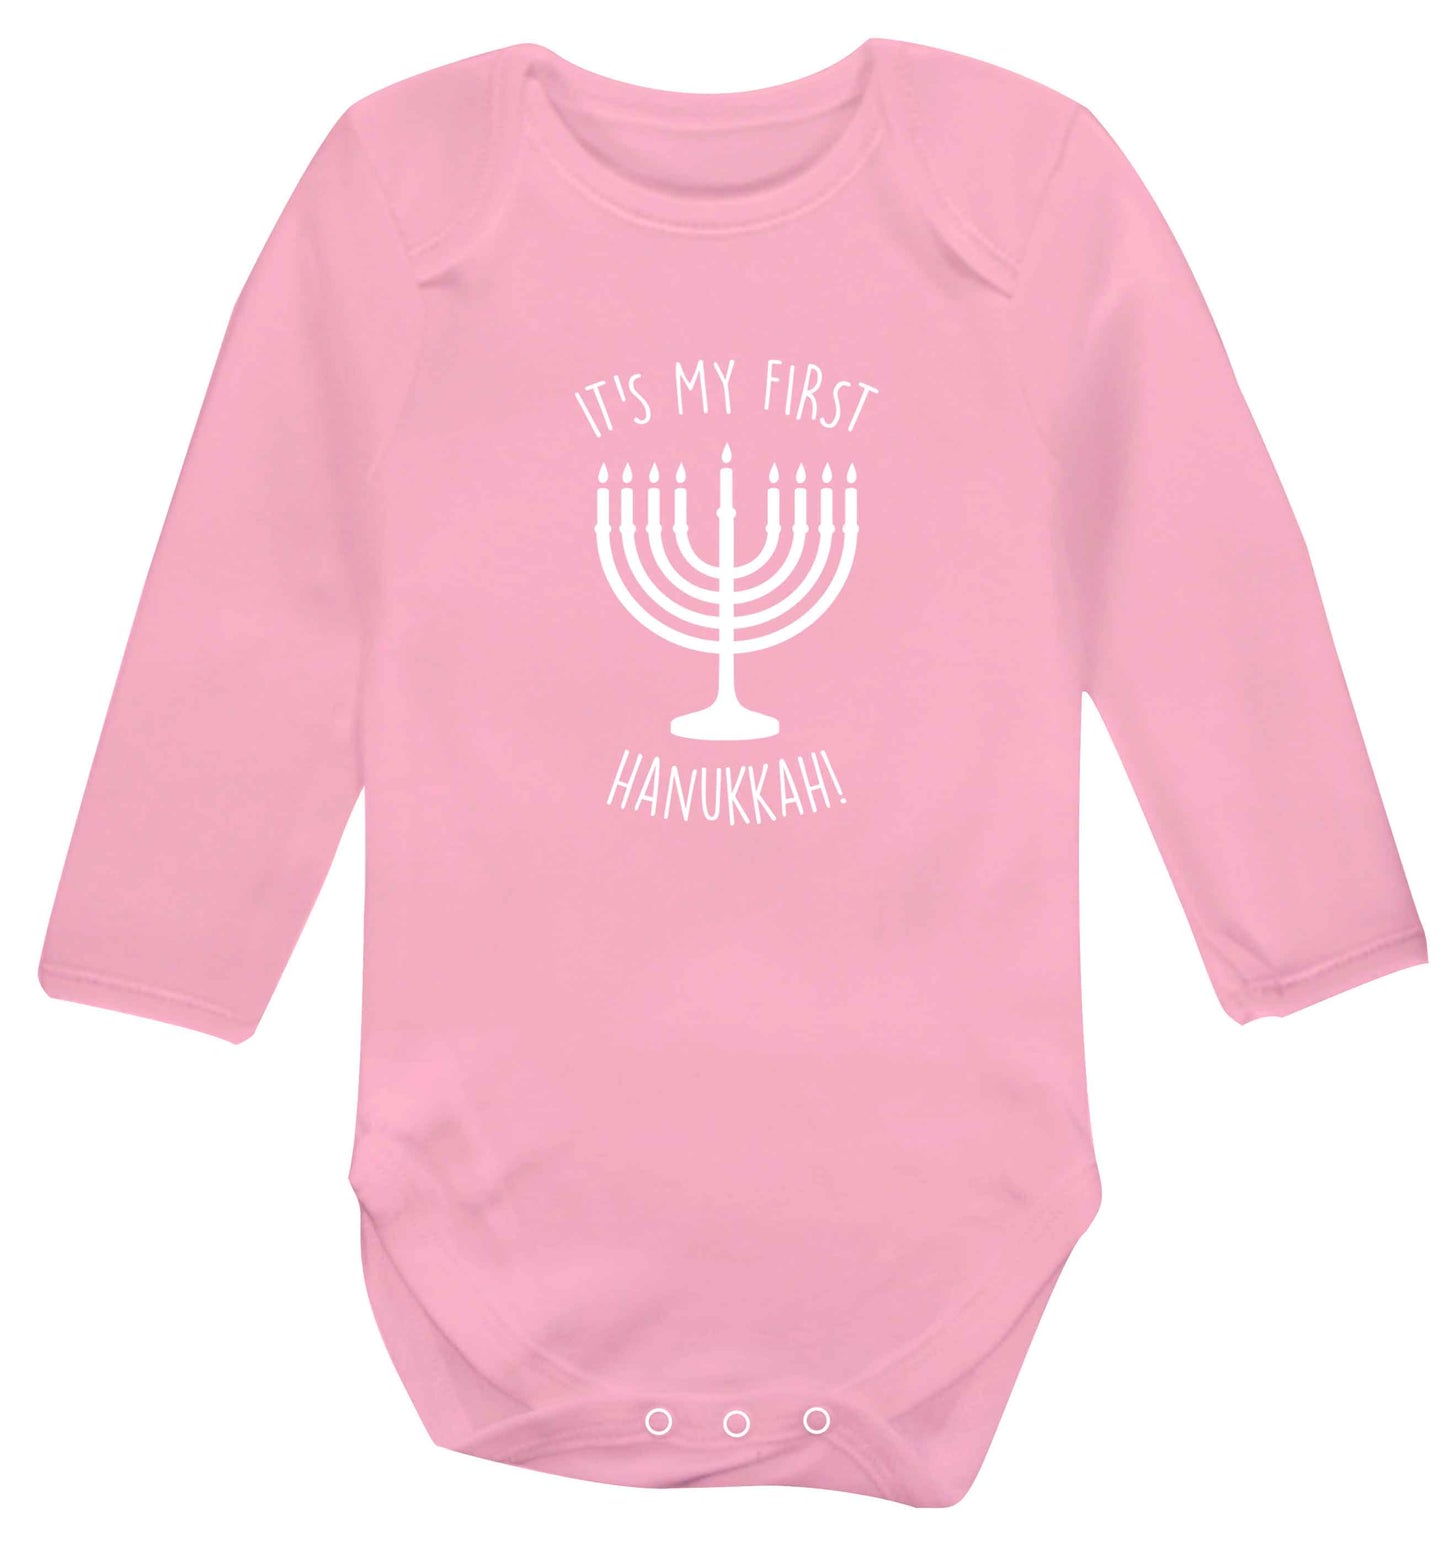 It's my first hanukkah baby vest long sleeved pale pink 6-12 months